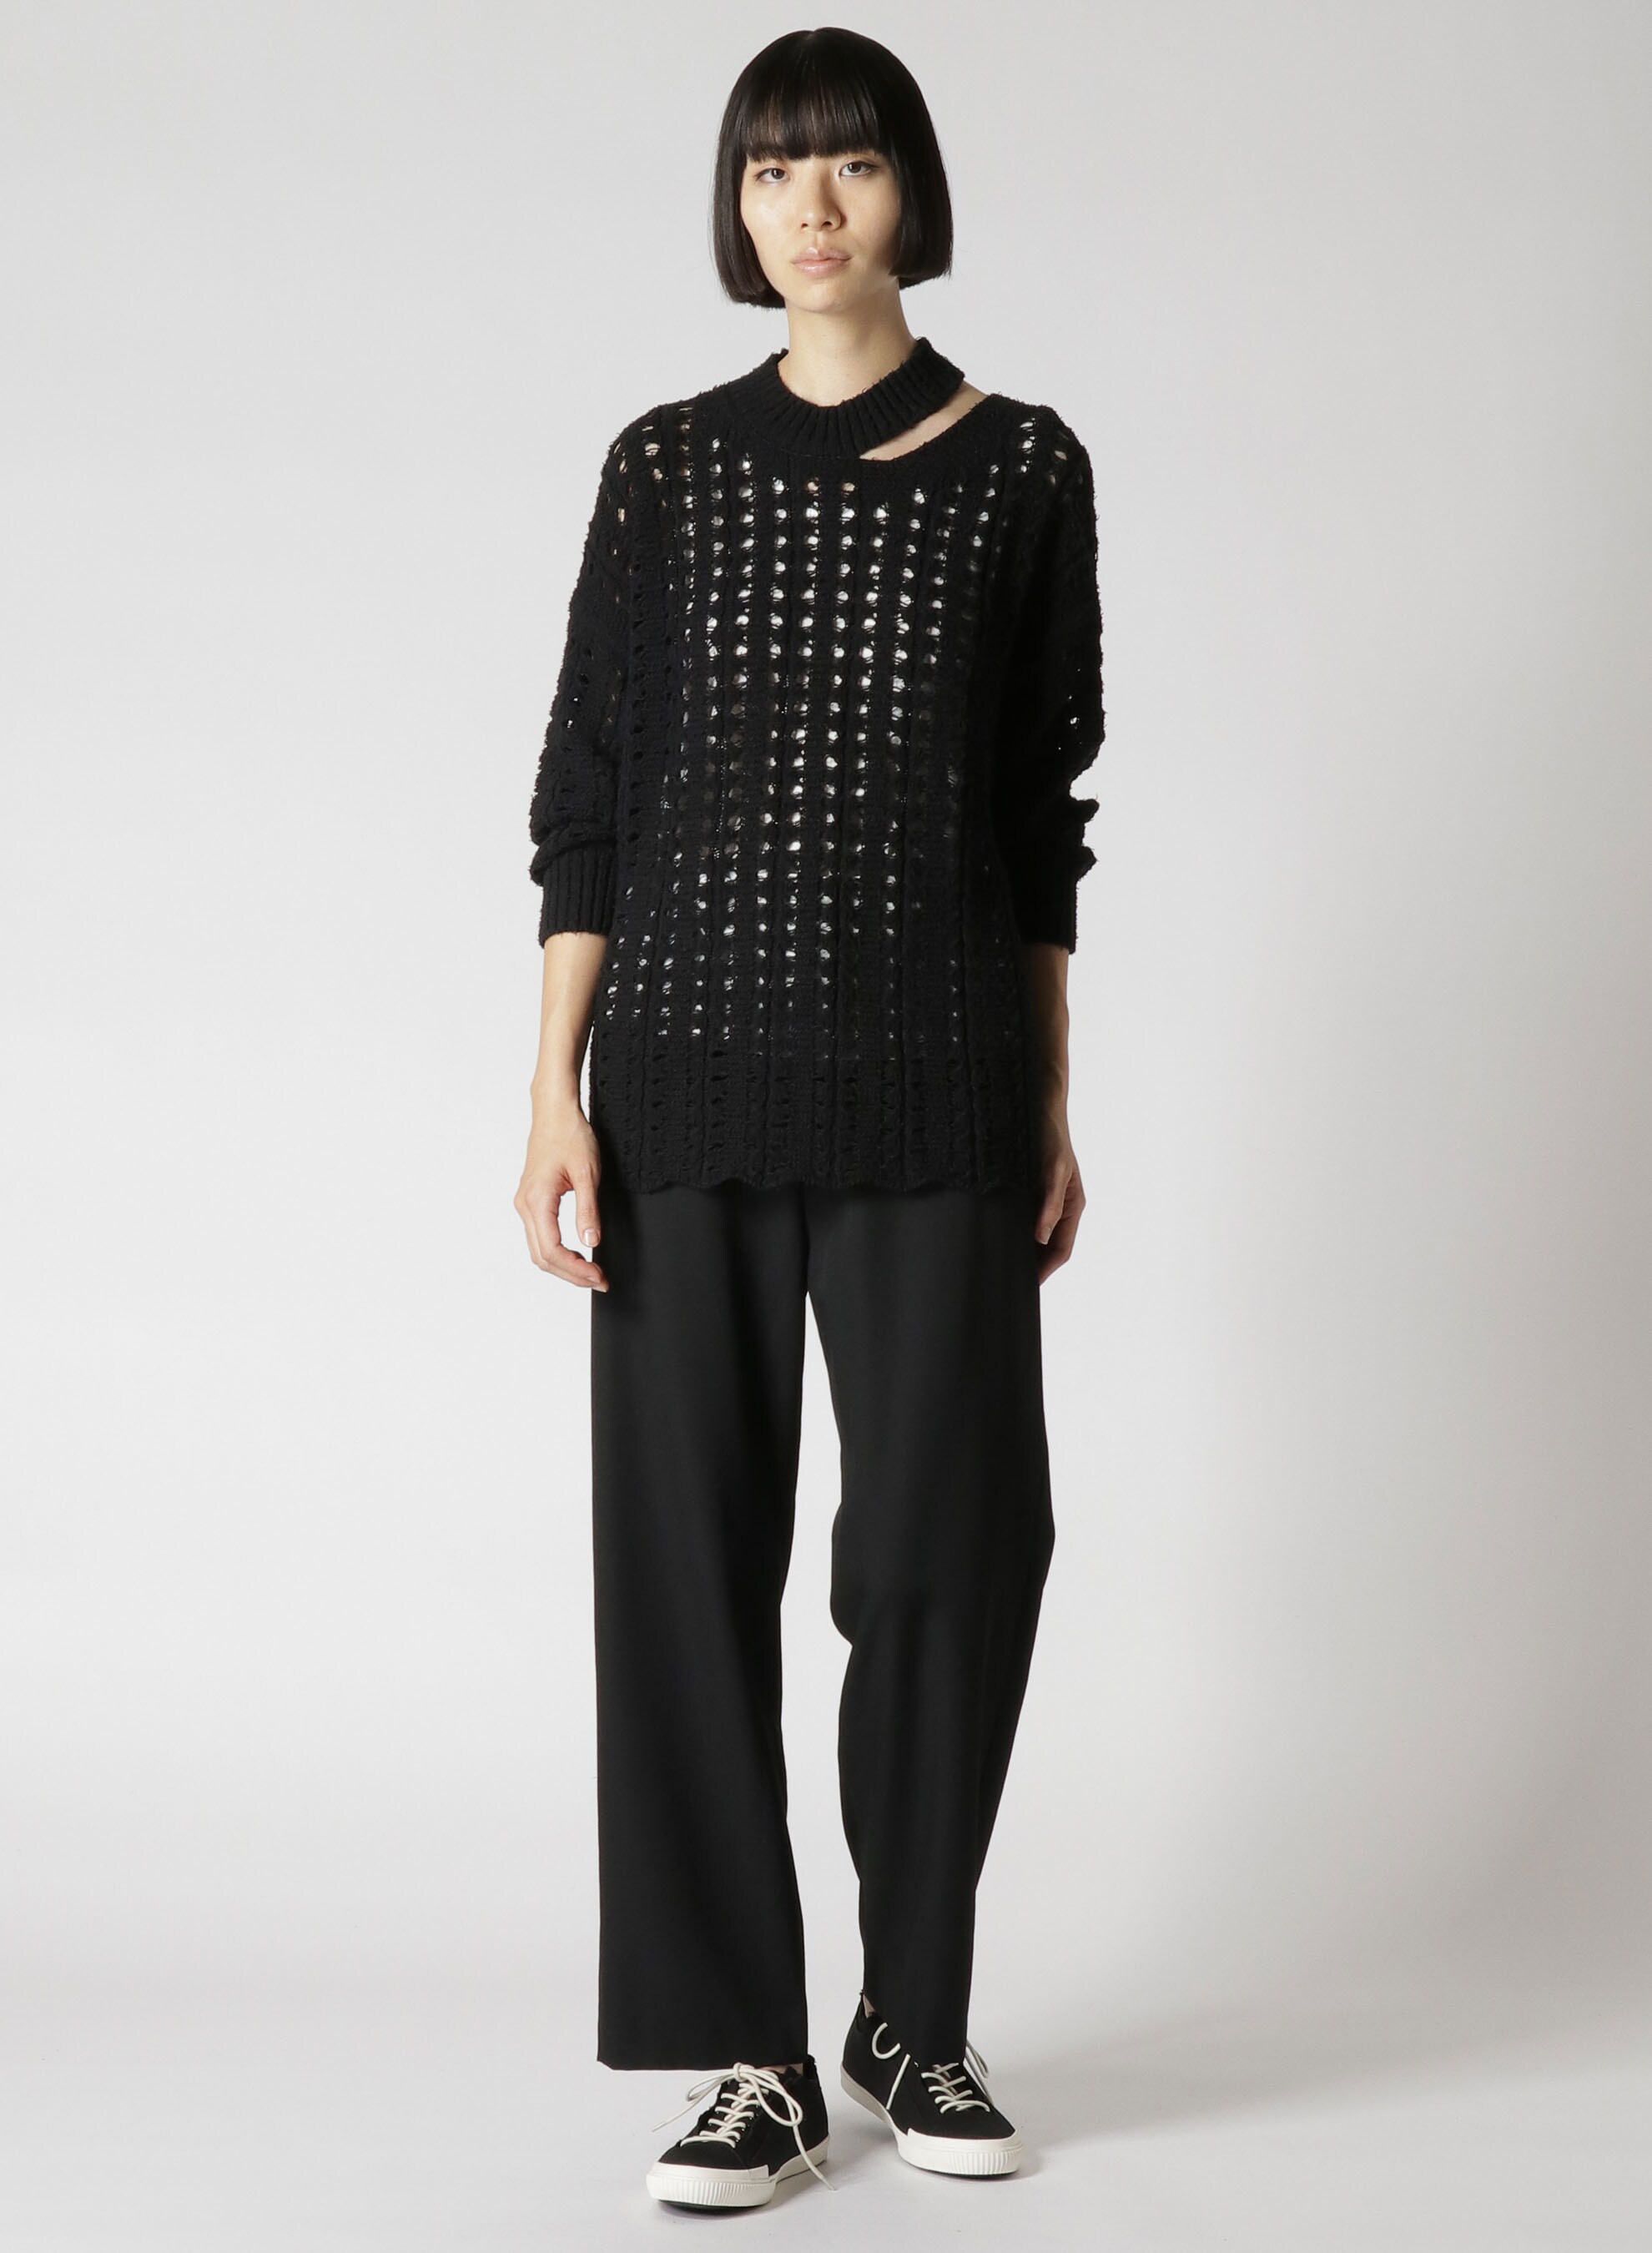 SWEATER WITH HOLES AND SLIT IN NECK(S Black): Yohji Yamamoto｜THE 